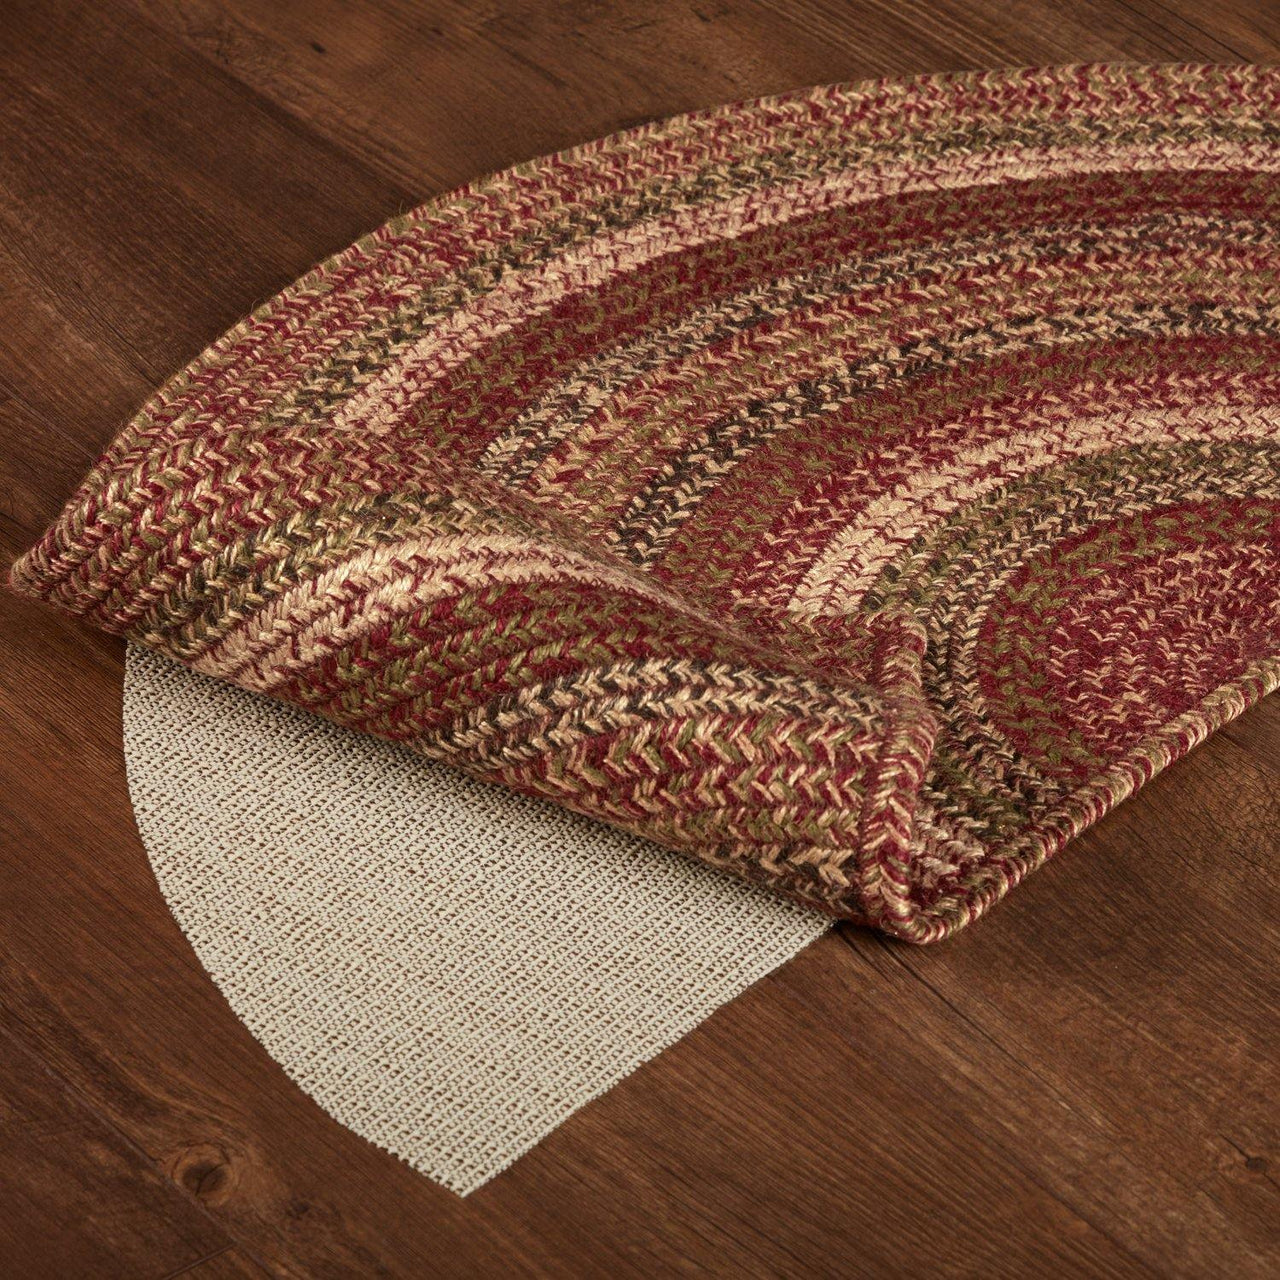 Cider Mill Jute Braided Rug Half Circle 16.5"x33" with Rug Pad VHC Brands - The Fox Decor